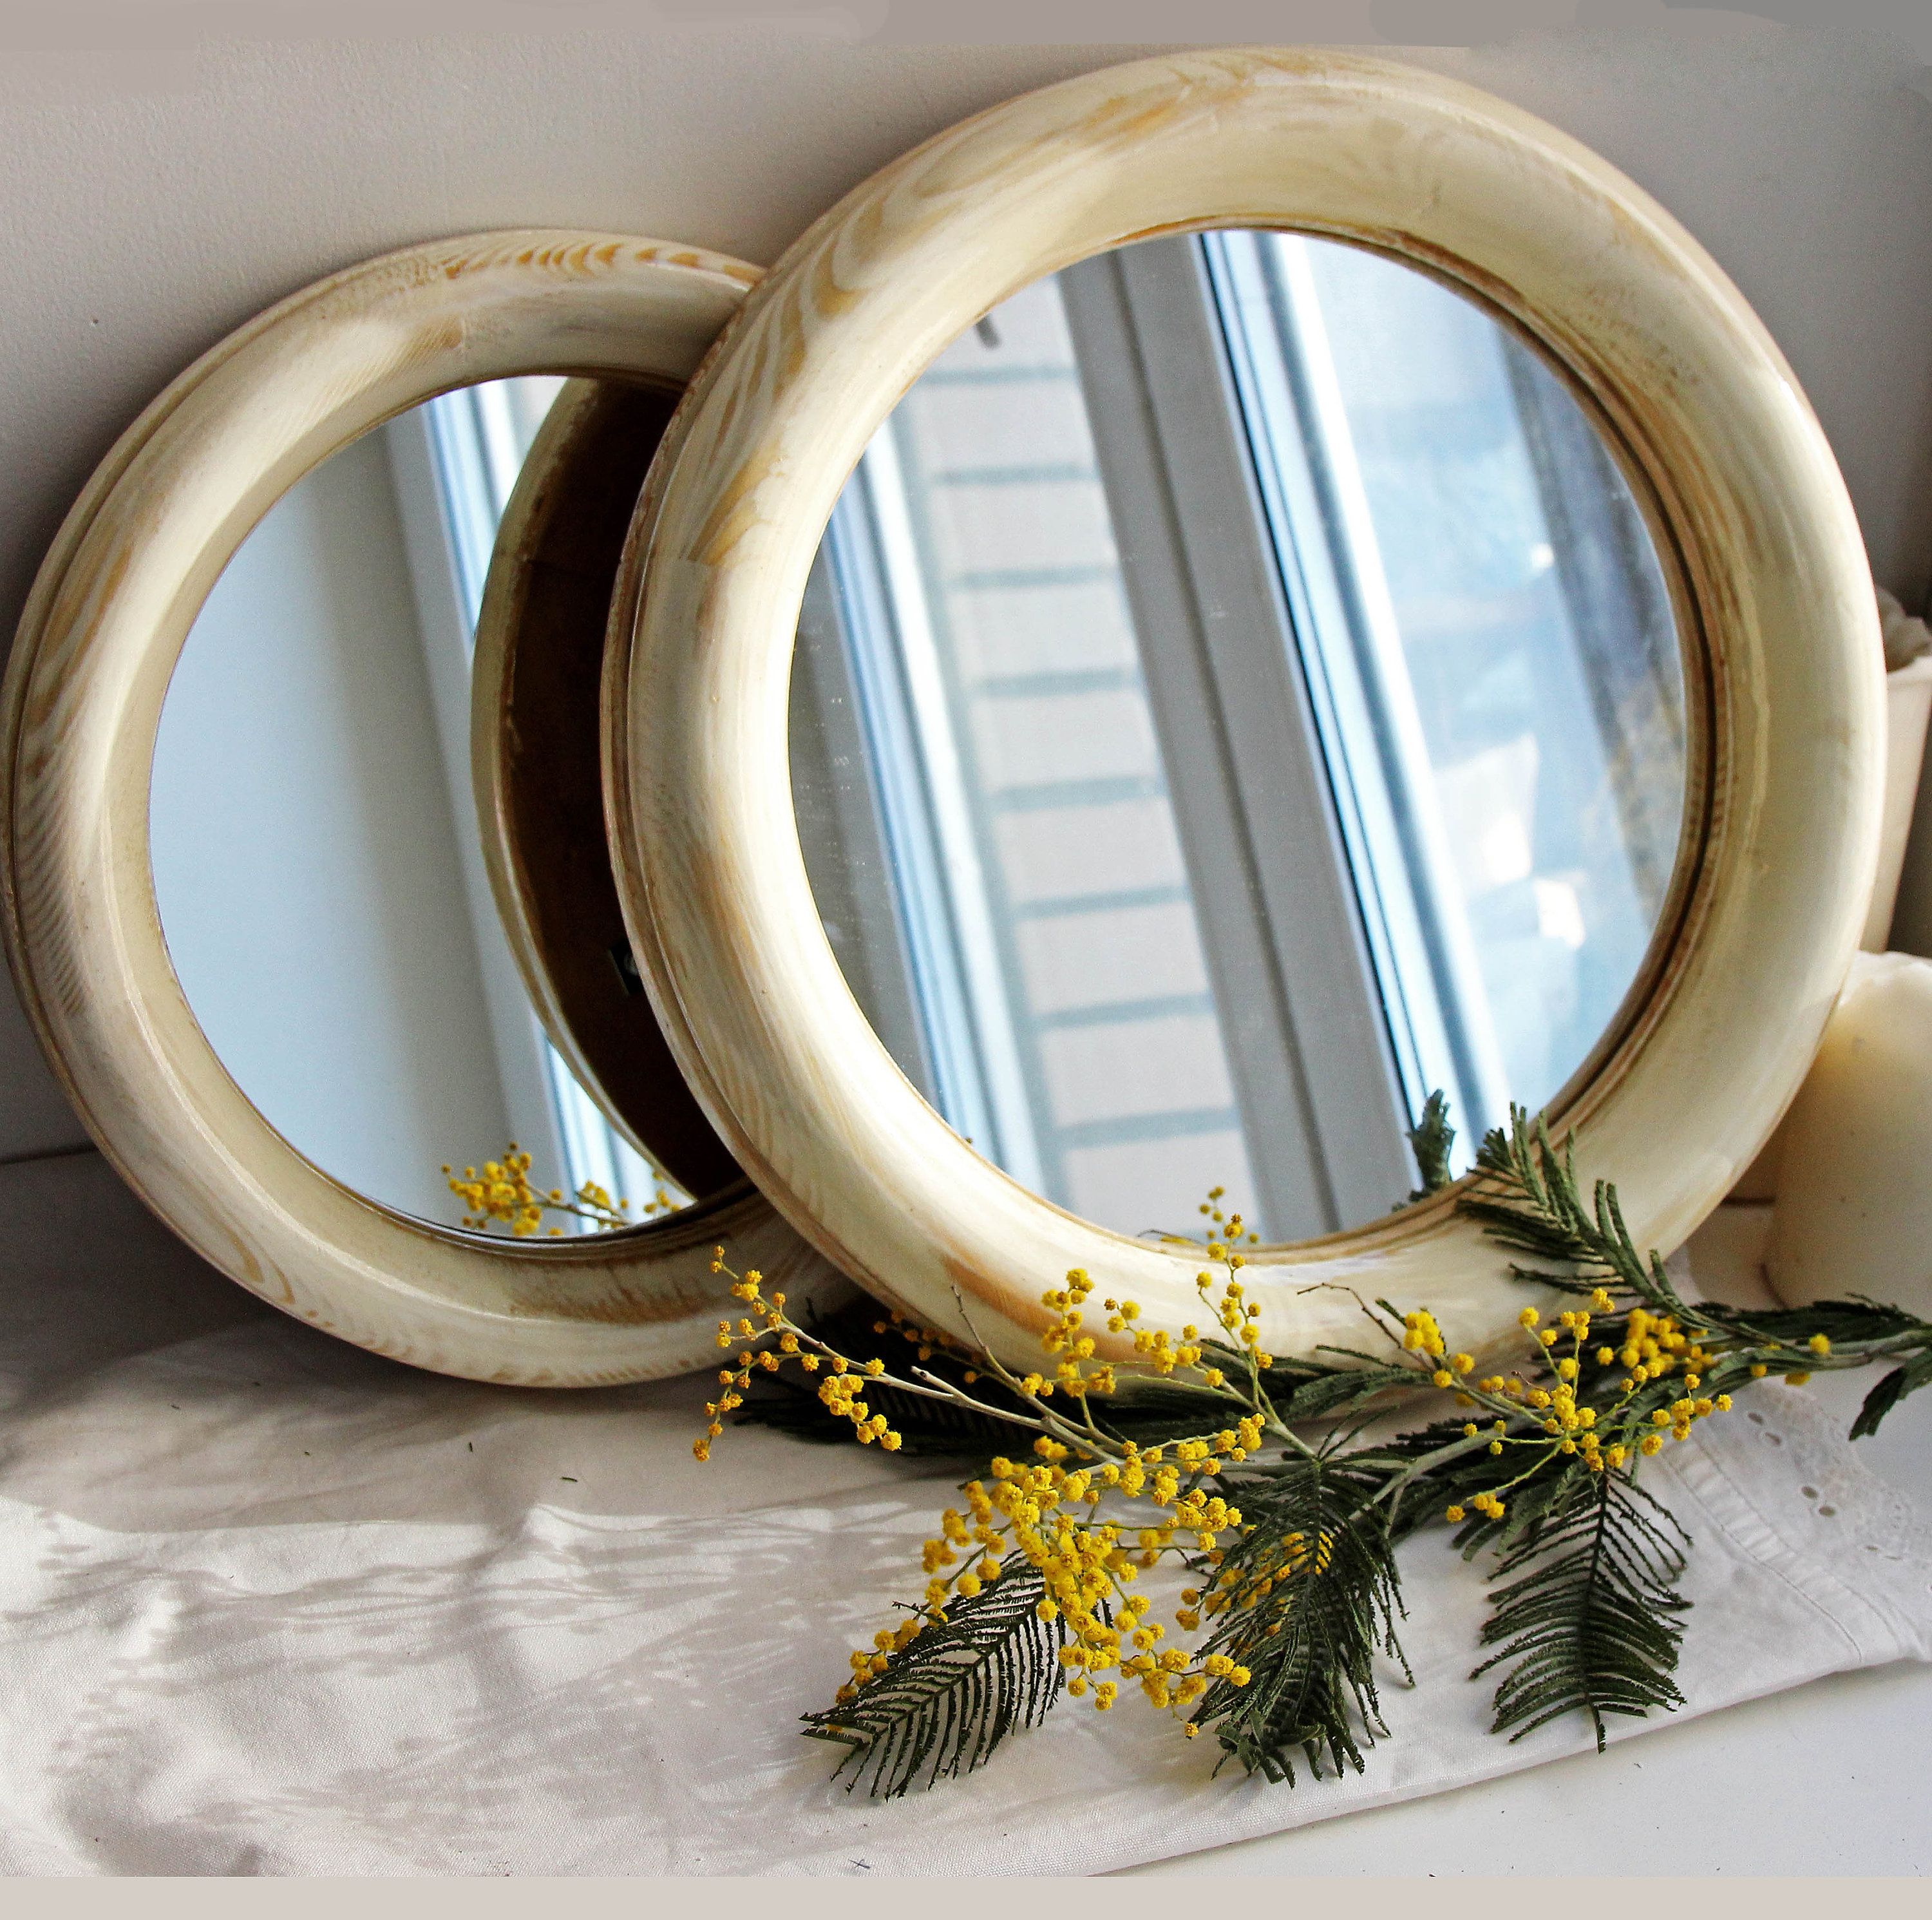 Most Up To Date Round Mirror Round Decorative Wall Mirror Wood Mirror Frame Wall Mirror  Wall Decor Round Ivory Mirror Small Round Framed Wall Mount Mirror With Regard To Small Round Decorative Wall Mirrors (View 6 of 20)